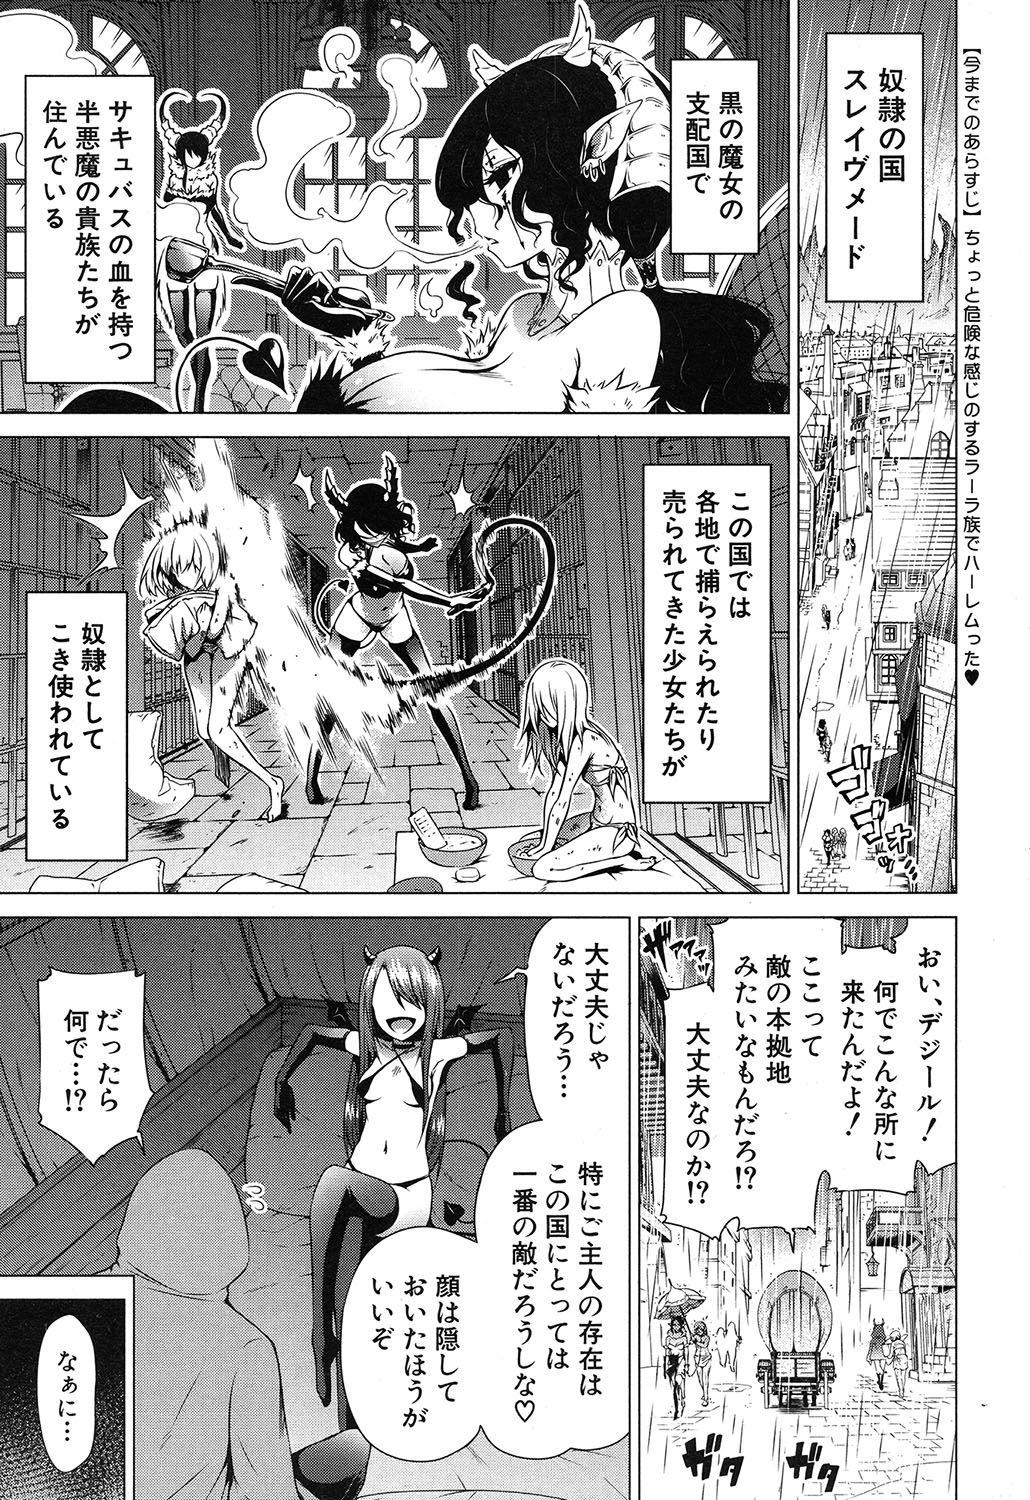 Cameltoe COMIC Mugen Tensei 2020-05 Blondes - Page 4